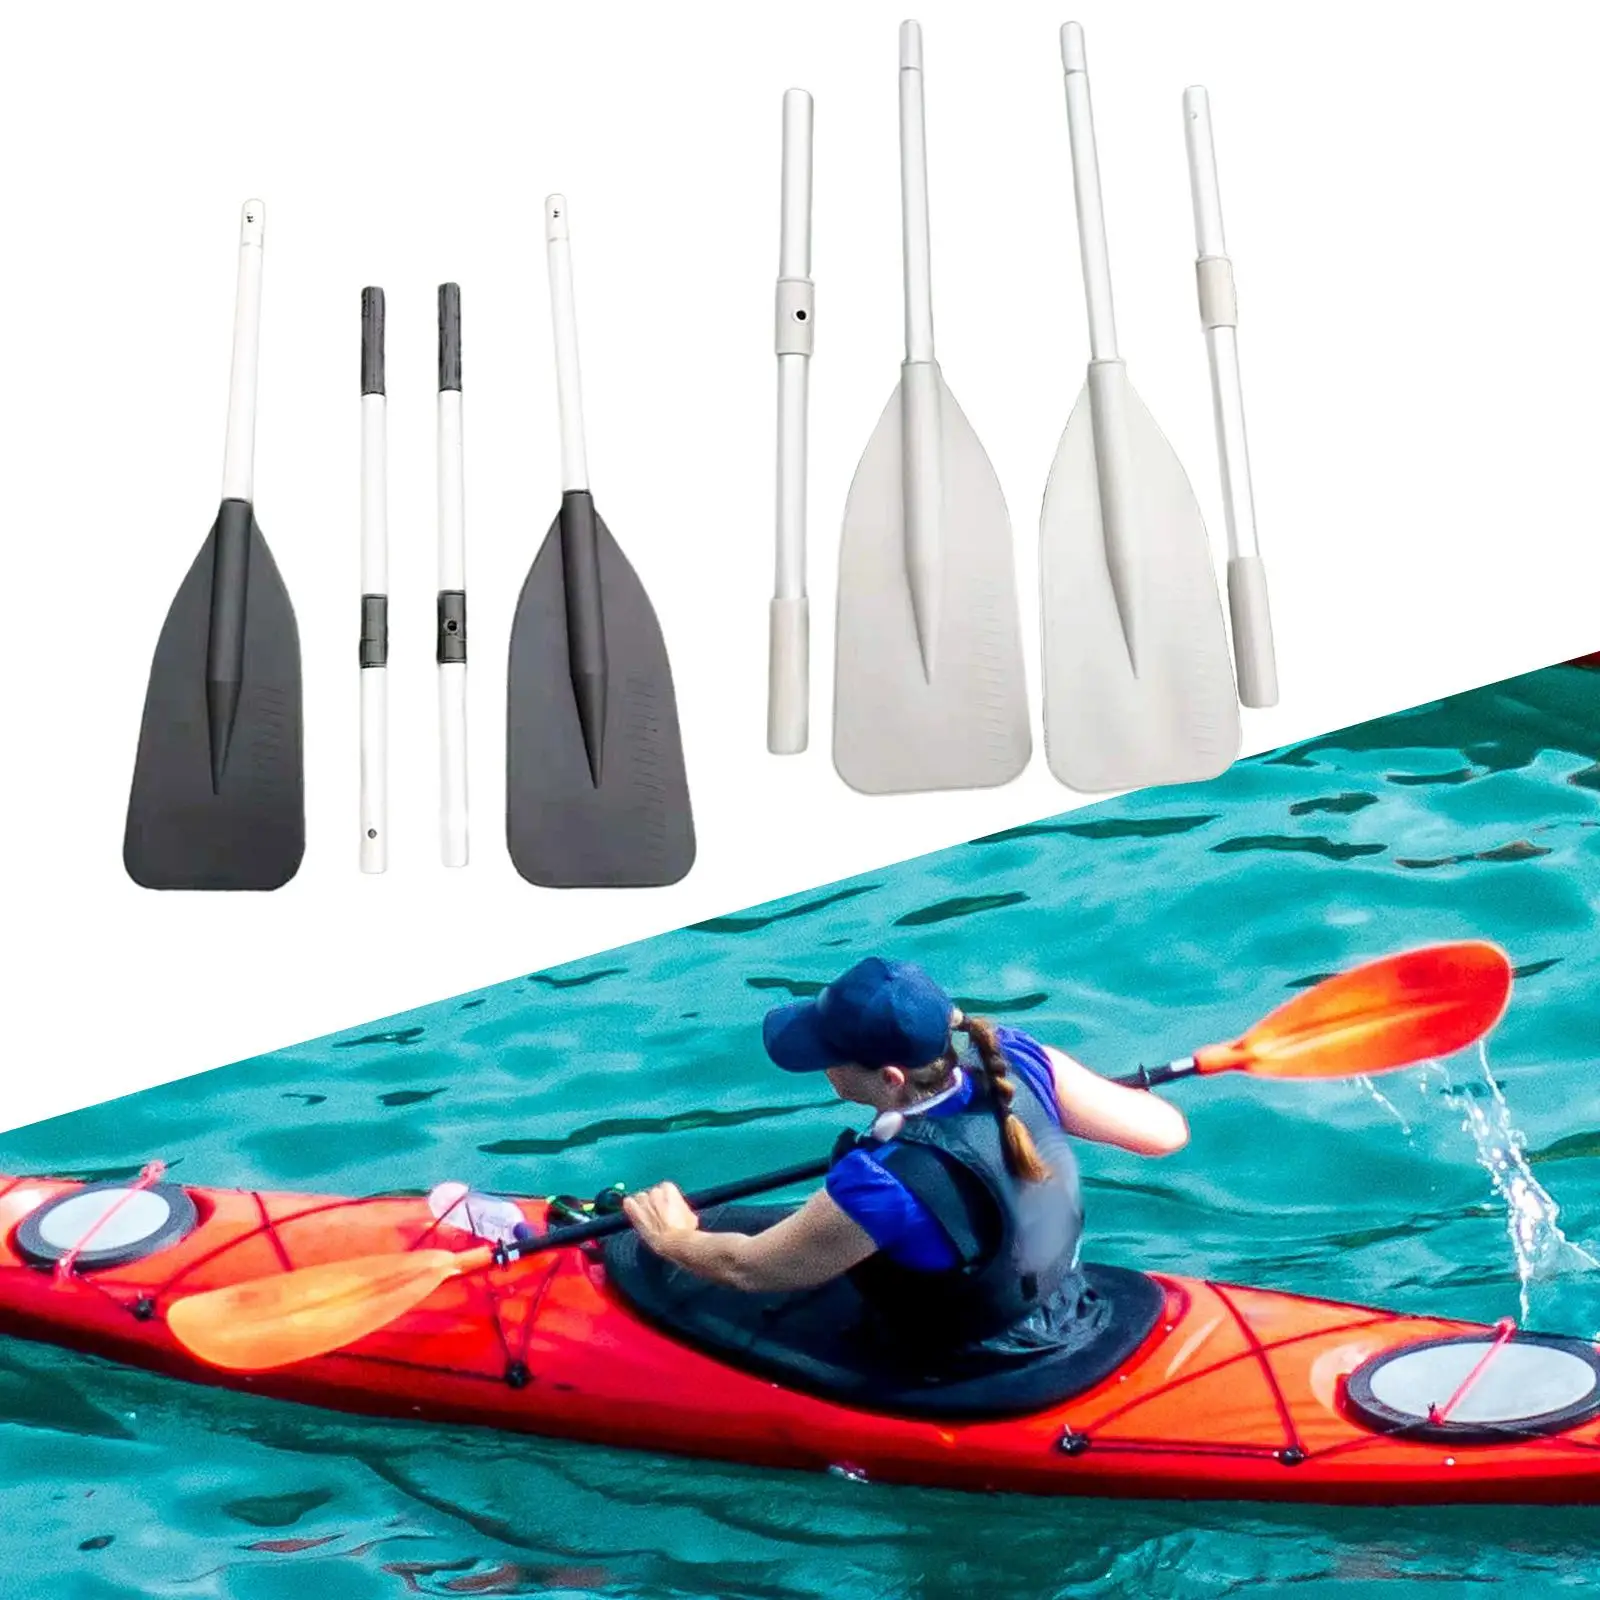 2Pcs Kayak Paddle Removable Accessories Portable Lightweight Packable for Stand up Boat Surfing Canoeing Paddleboard Surfboard